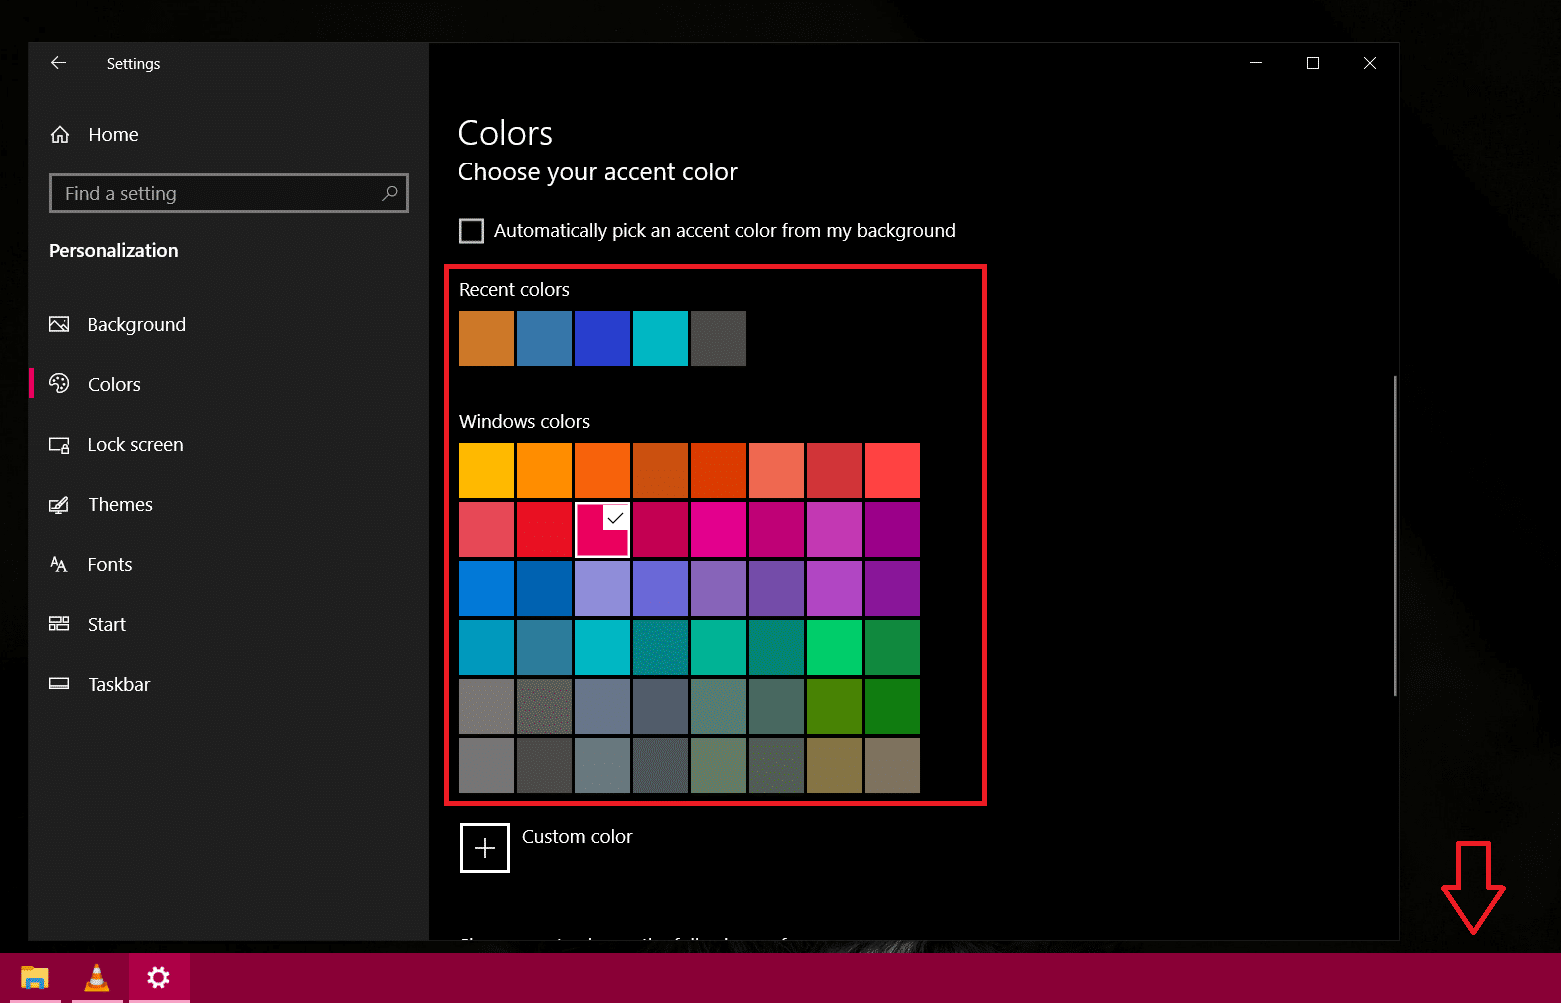 Colors option in Personalization.